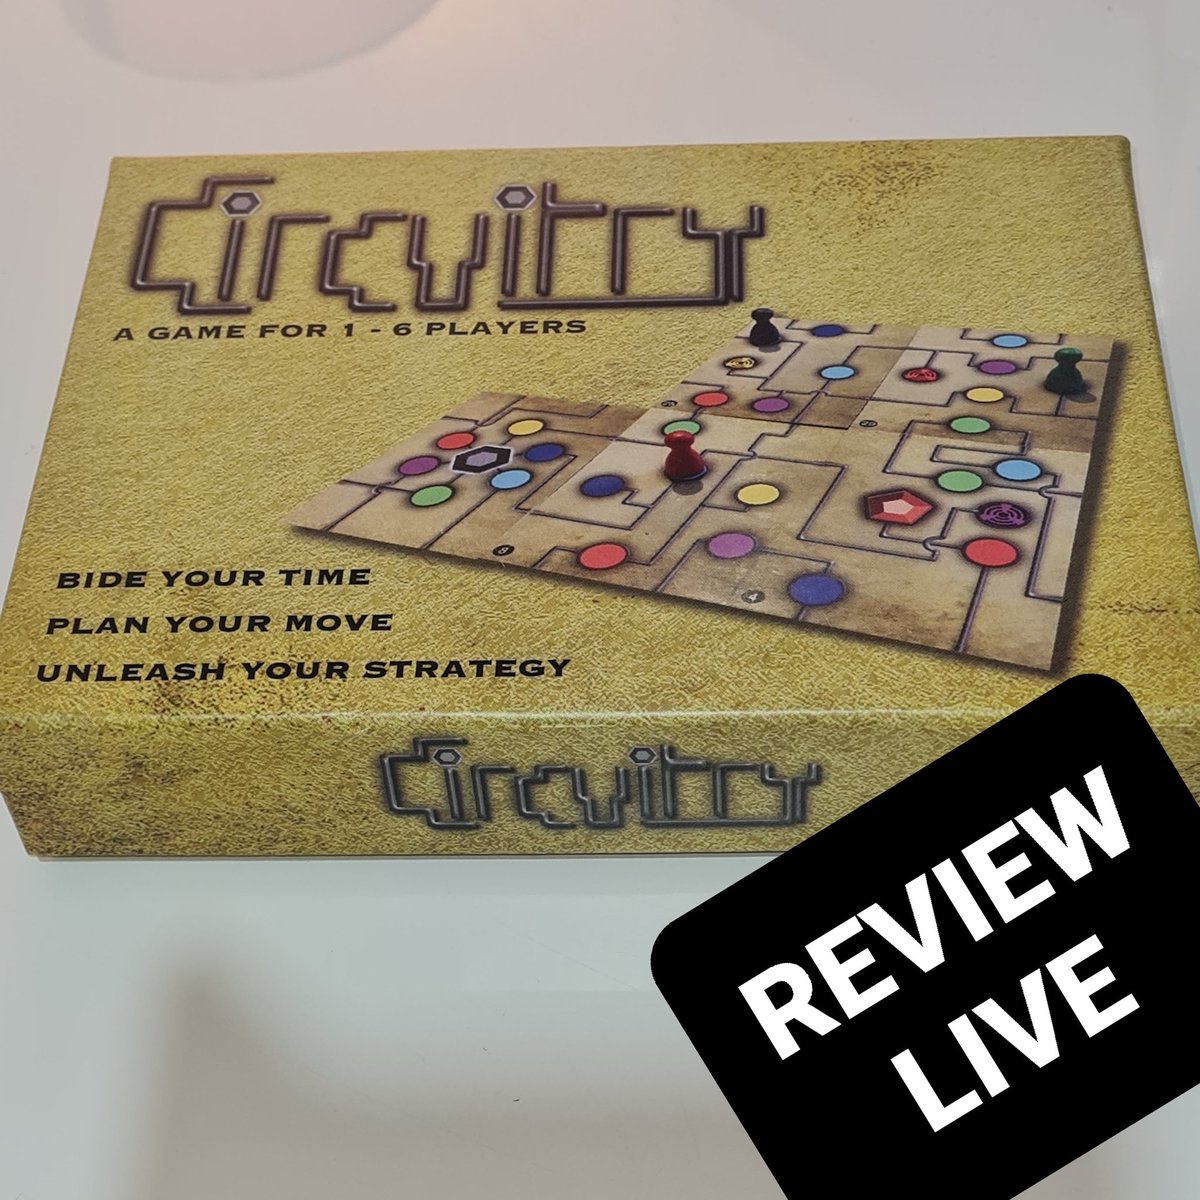 REVIEW LIVE - Circuitry

An awesome concept for a little game. Really enjoyed this one!

Full review - dbgames.co.uk/post/review-36…

#circuitry #reviewlive #newreview #great #boardgaming #boardgames #boardgamecommunity #boardgamer #tabletop #tabletopgames #dbgames